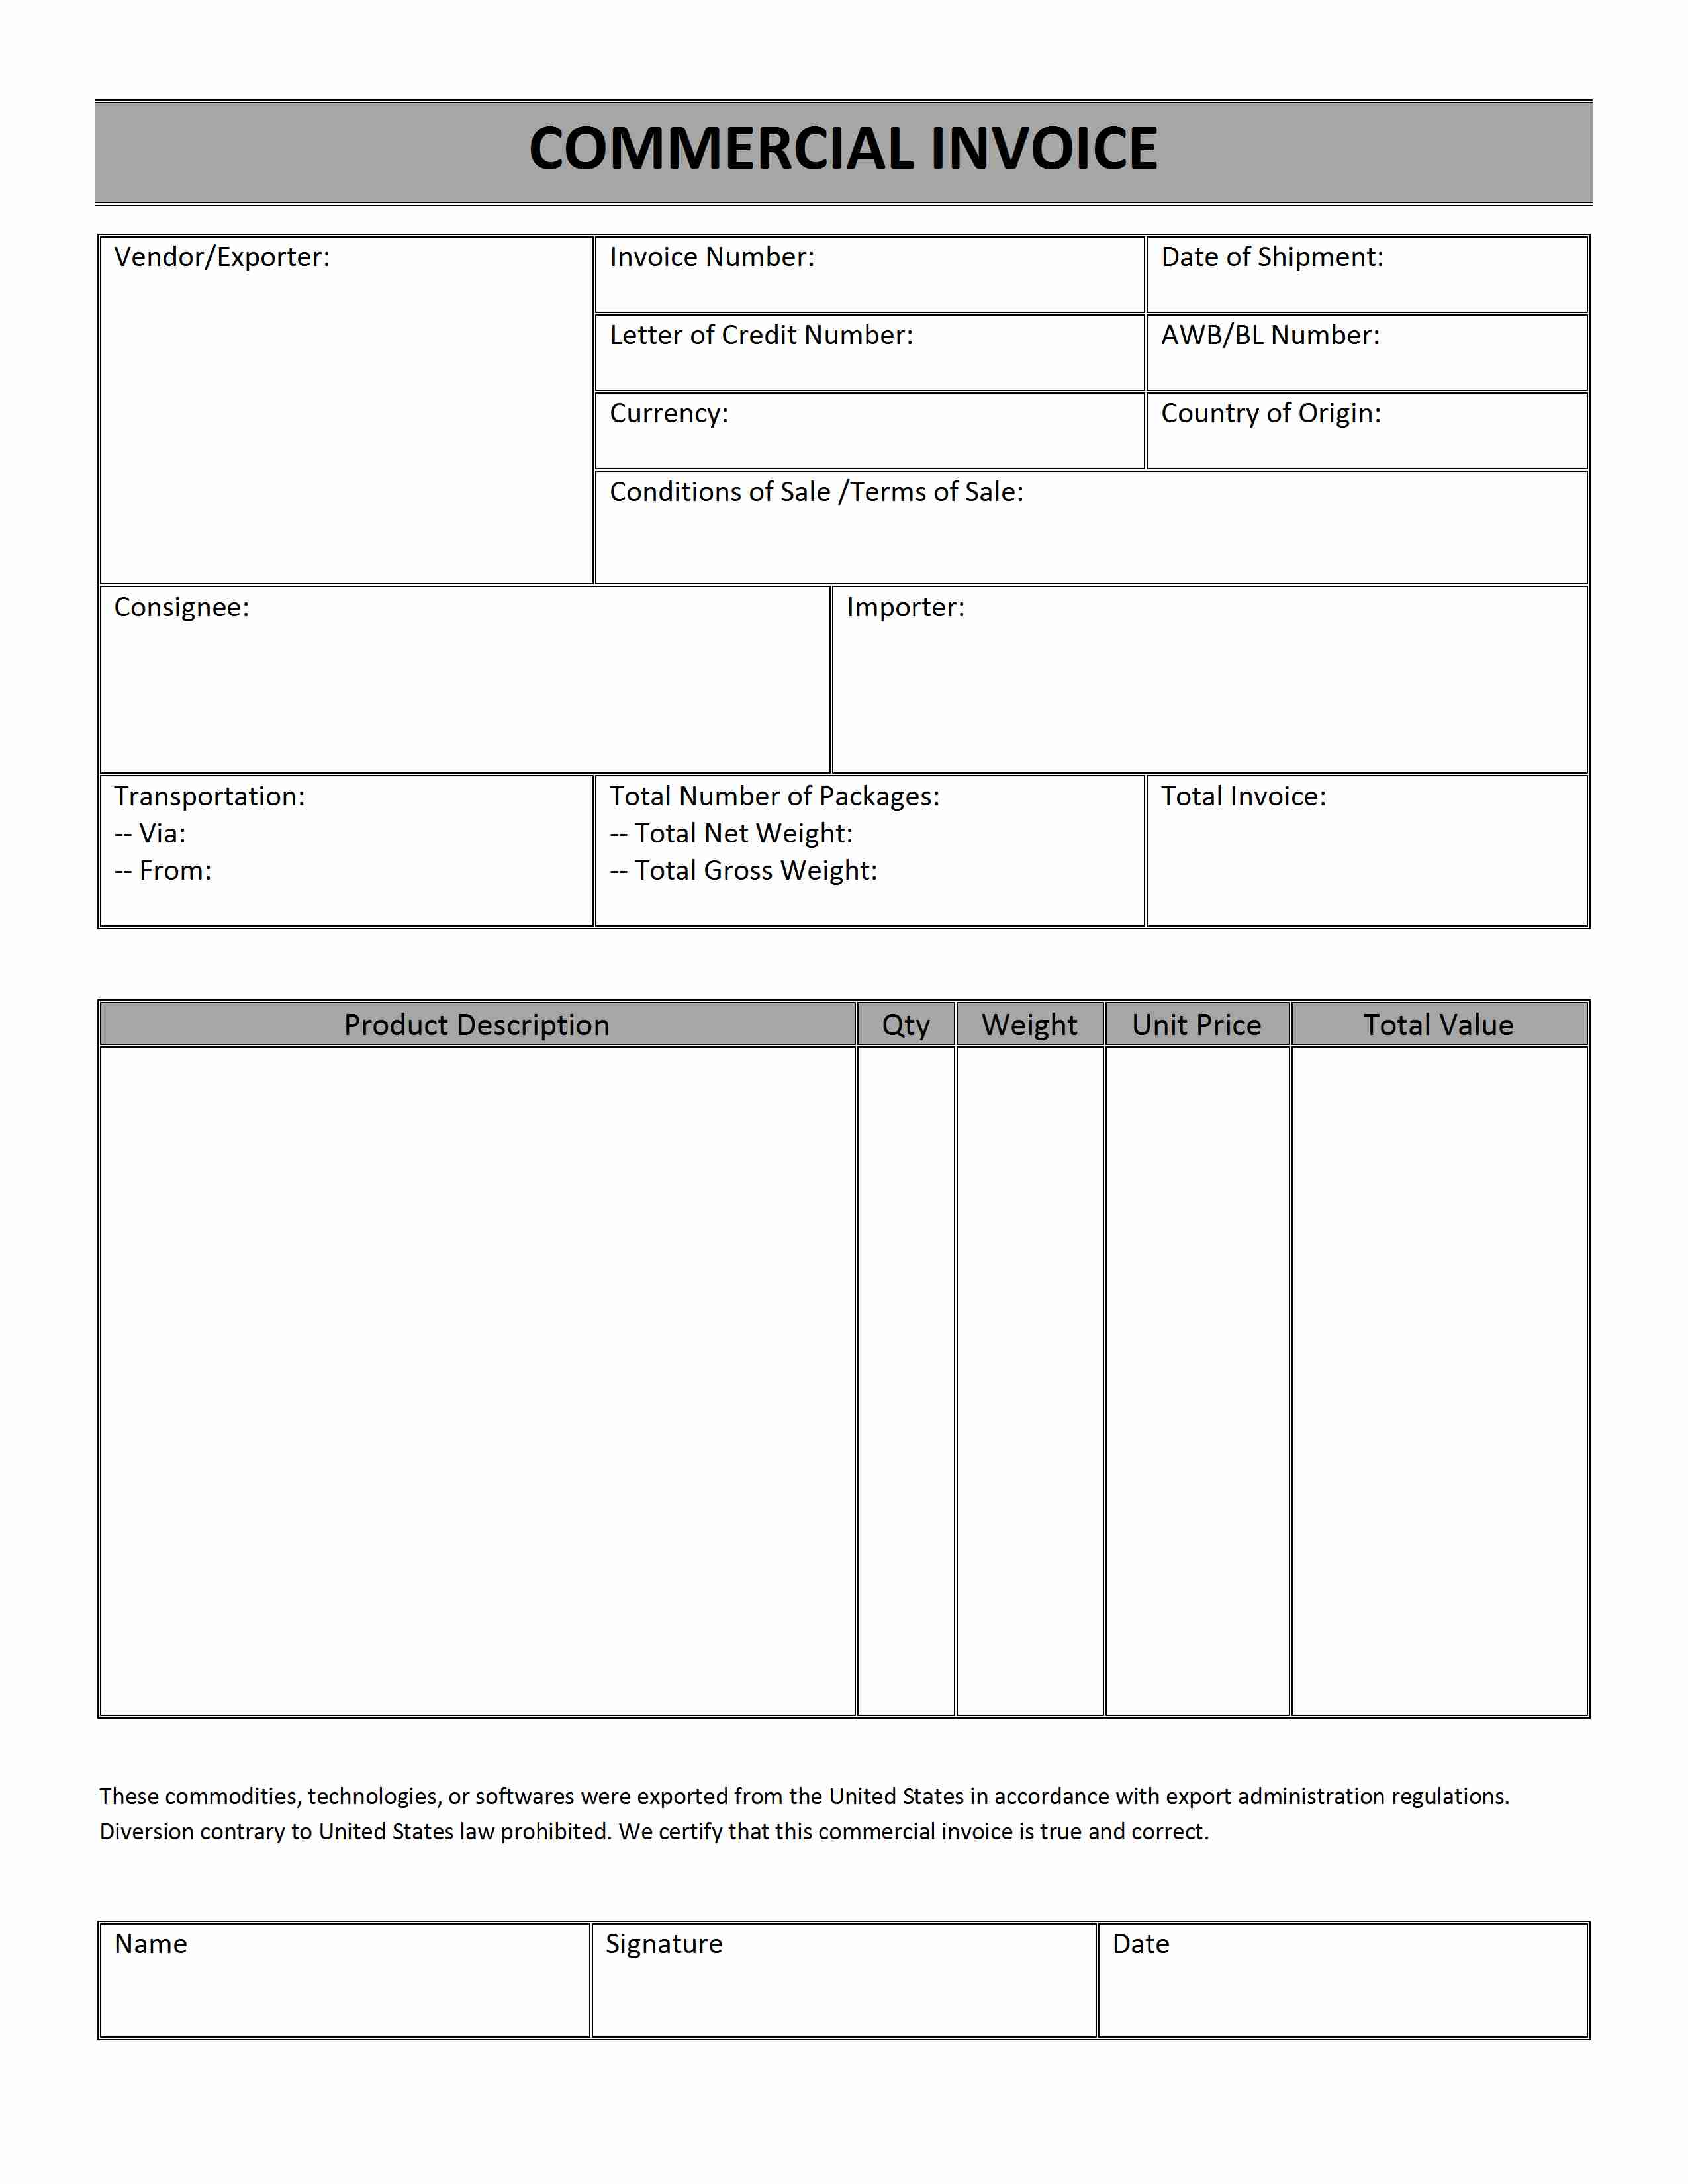 dhl-commercial-invoice-template-invoice-example